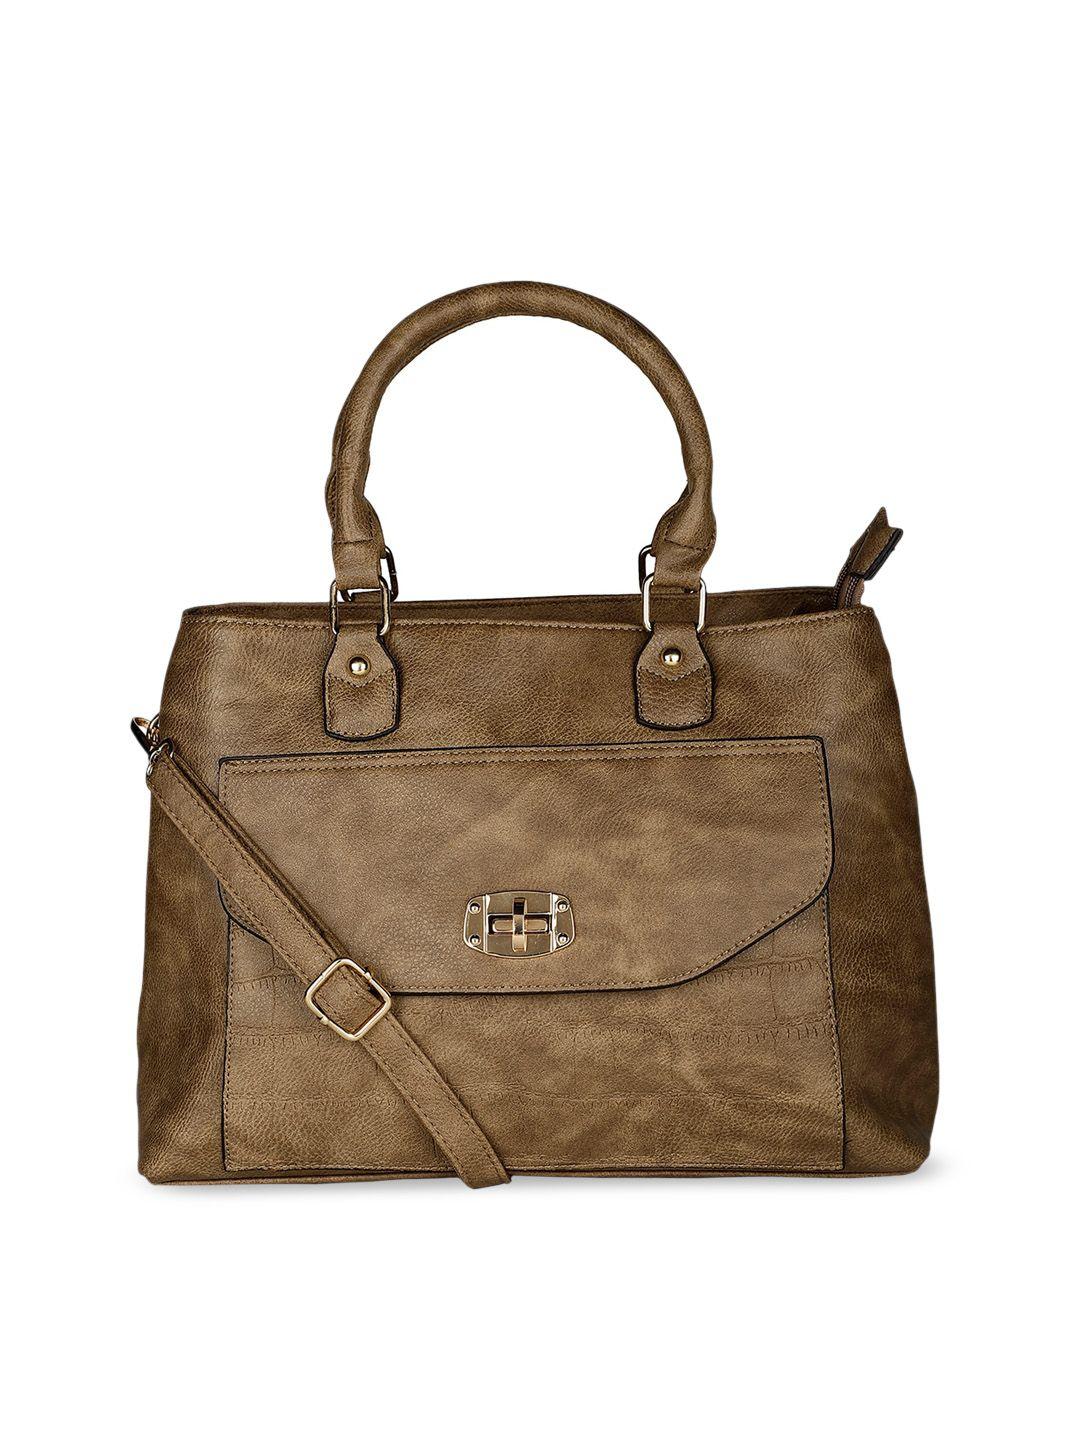 marie claire beige leather structured handheld bag